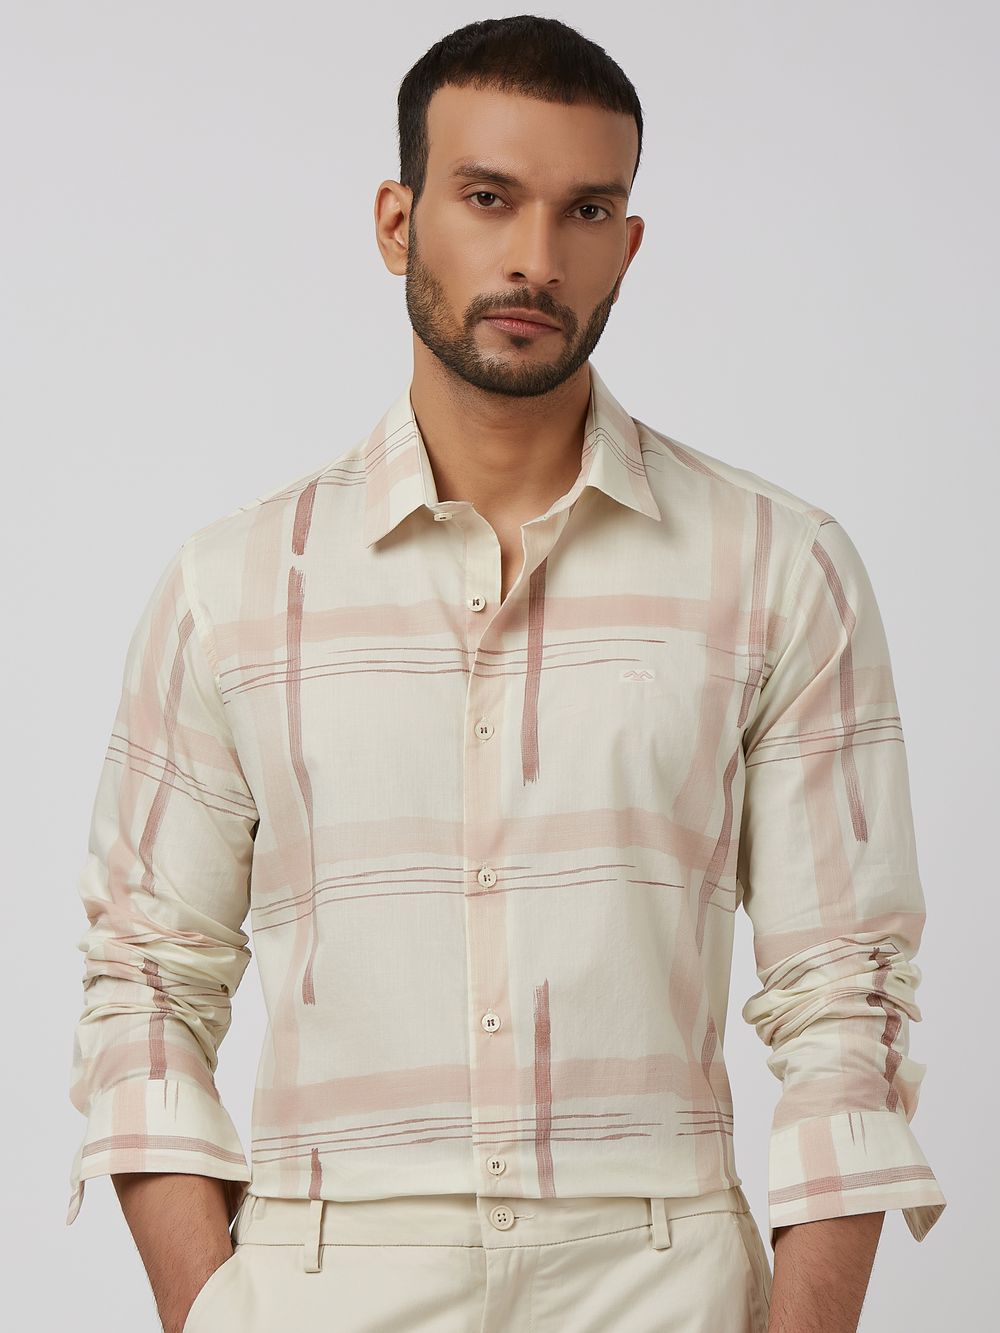 Off White Printed Check Slim Fit Casual Shirt